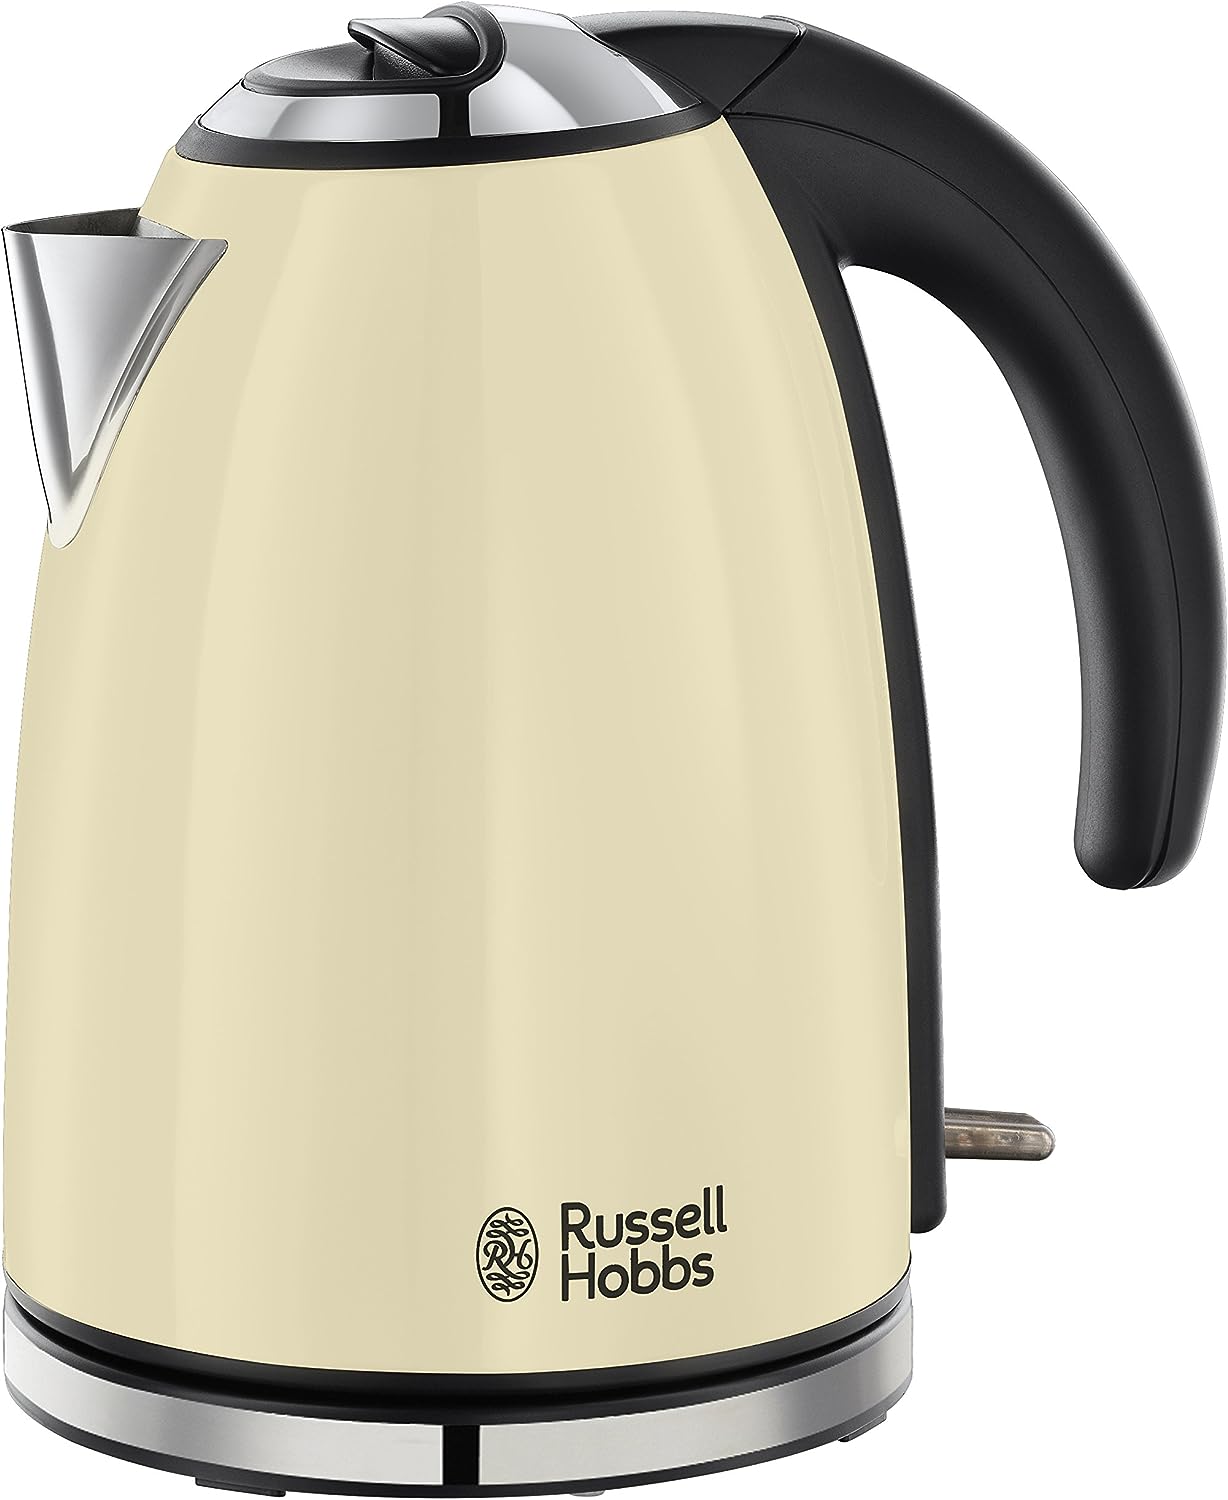 Russell Hobbs 18941 70 Electric Kettle